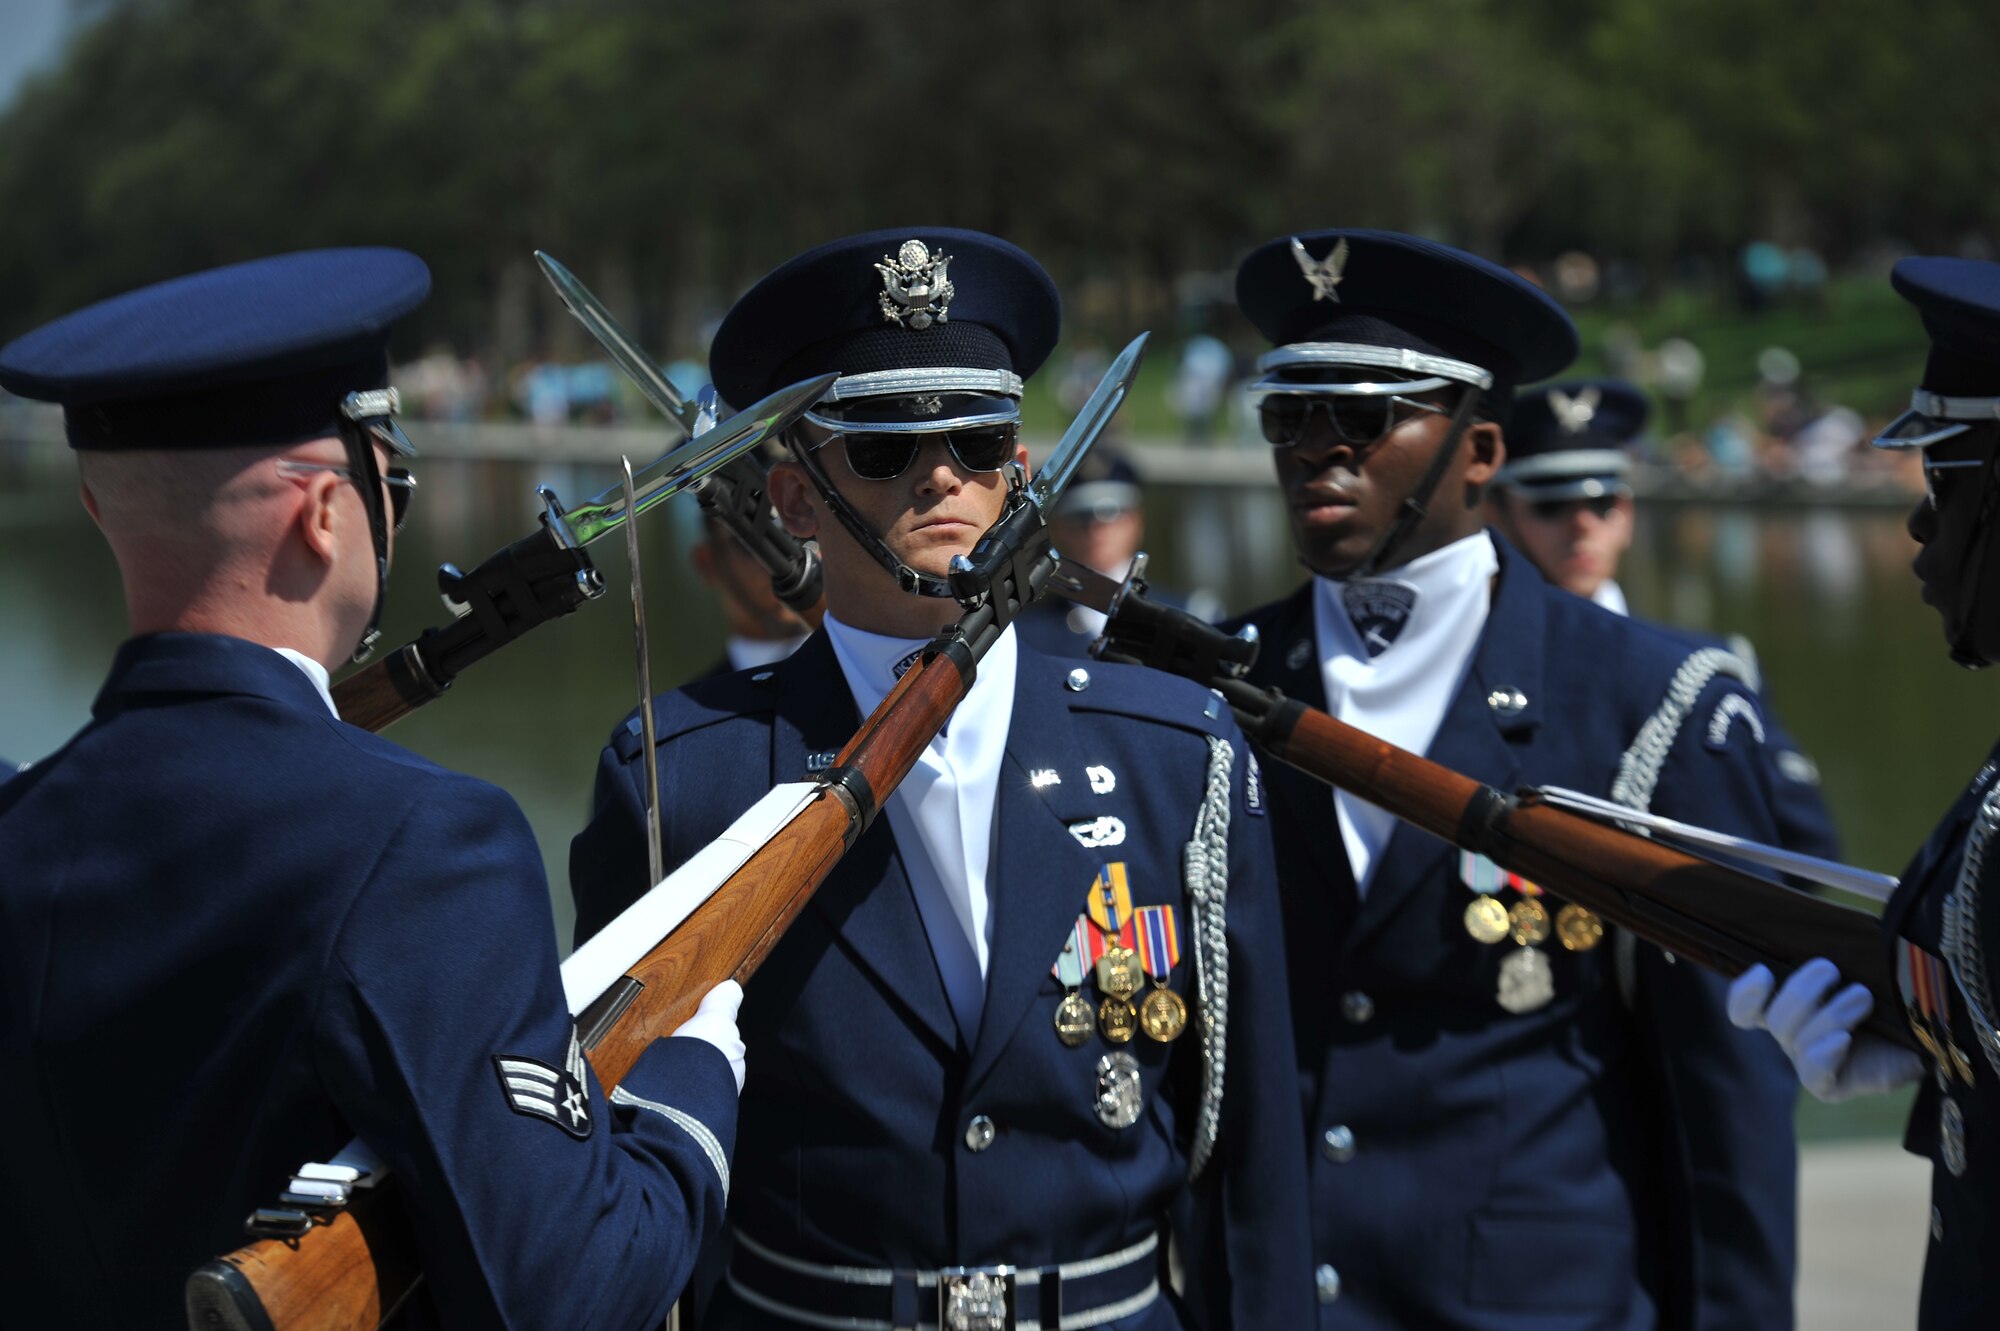 First Lt. Michael Lemorie is surrounded by the bayonets of fellow U.S. Air Force Honor Guard Drill Team members April 13, 2013, at the National Cherry Blossom Festival in Washington, D.C. As the Drill Team's flight commander, Lemorie often places himself in the middle of dangerous group movements and rifle exchanges to represent the trust Air Force officer have in the Airmen they lead. (U.S. Air Force photo/Airman 1st Class Alexander Riedel)